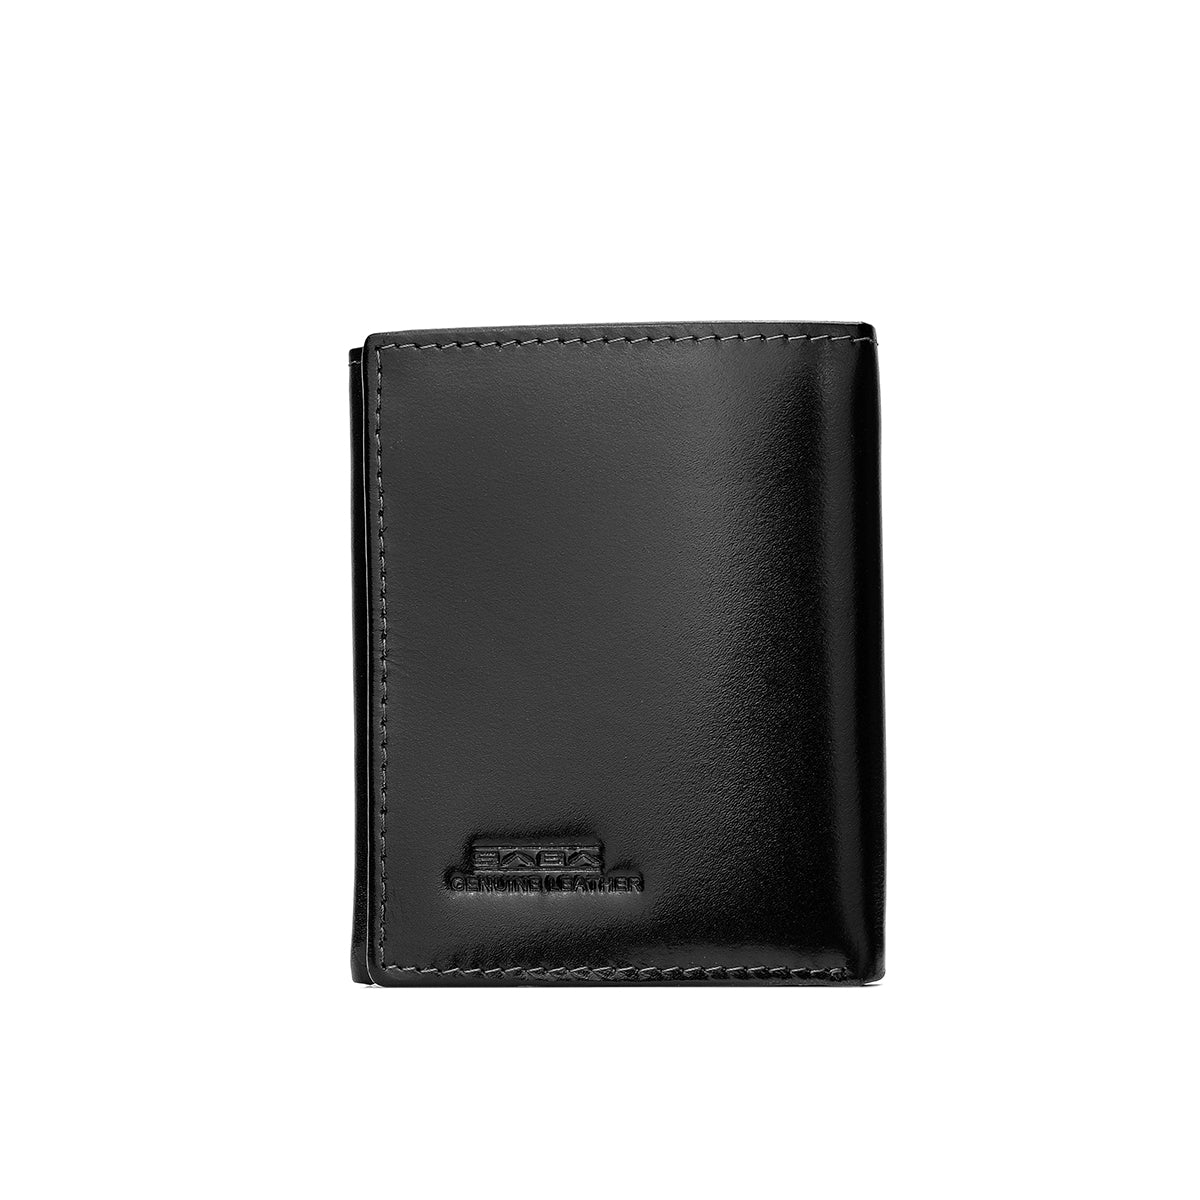 Men's wallet with a stylish design, genuine leather, black or brown